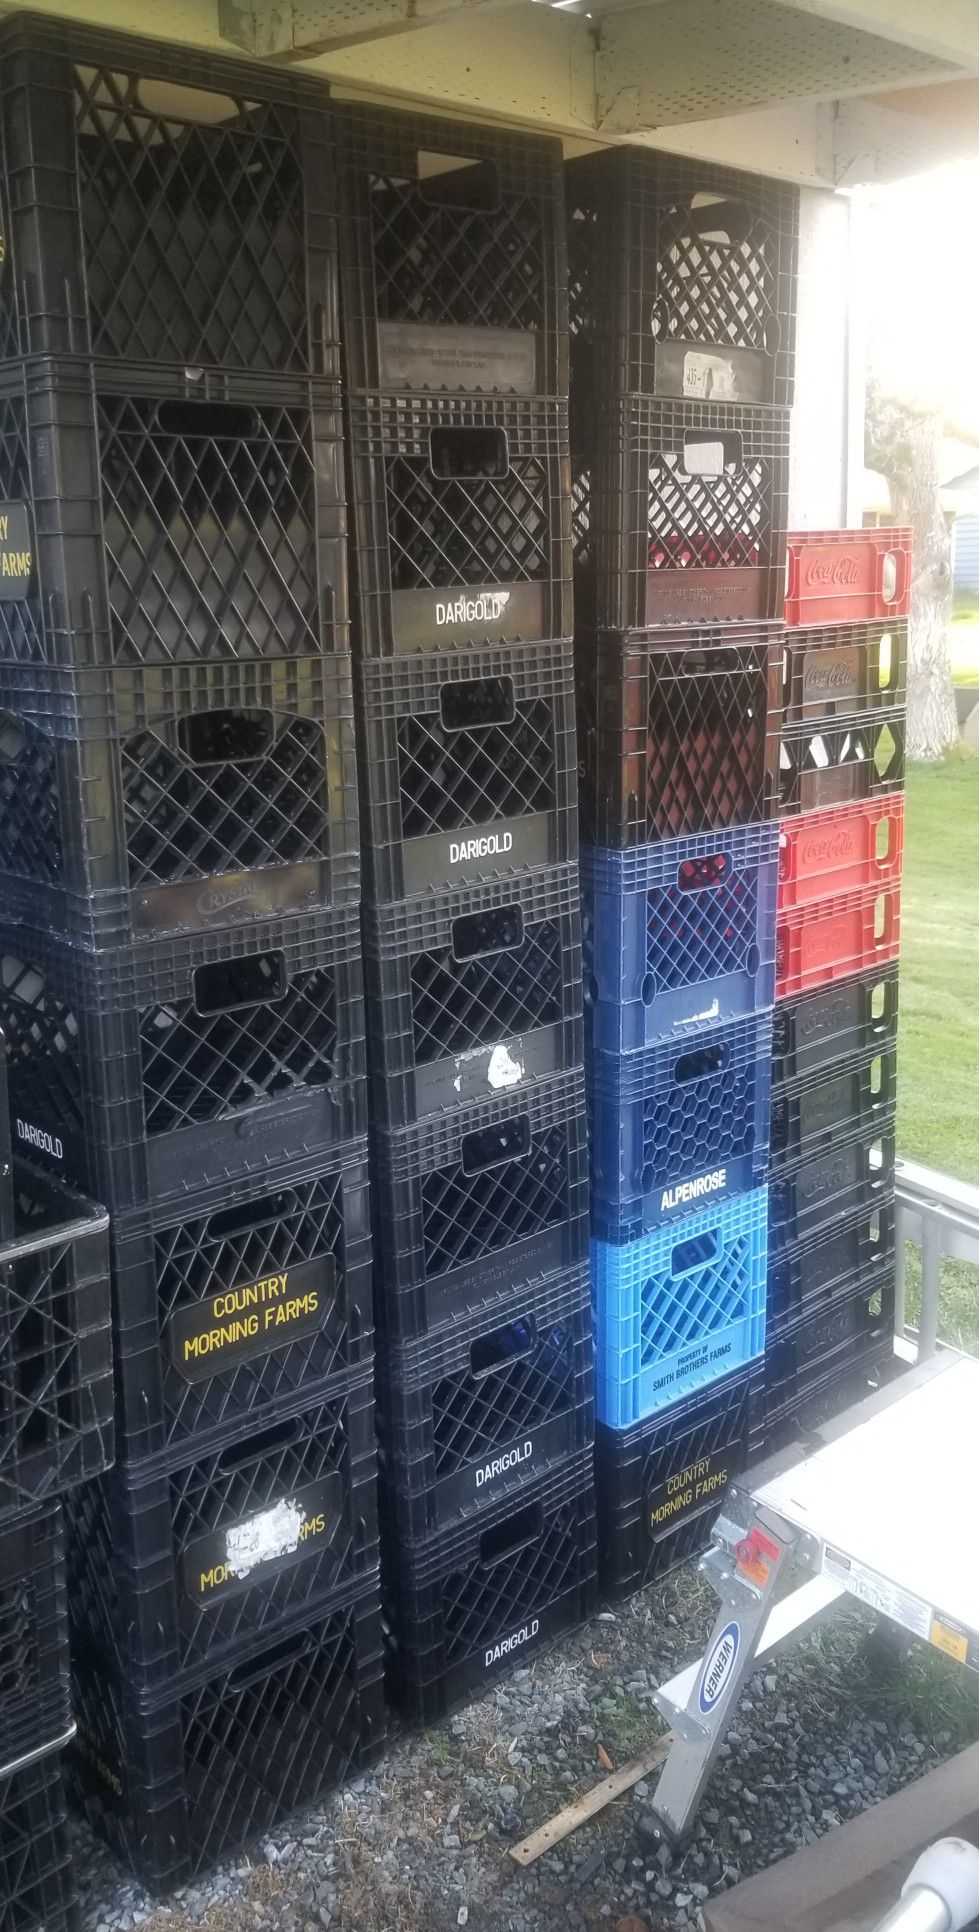 Milk crates and storage containers